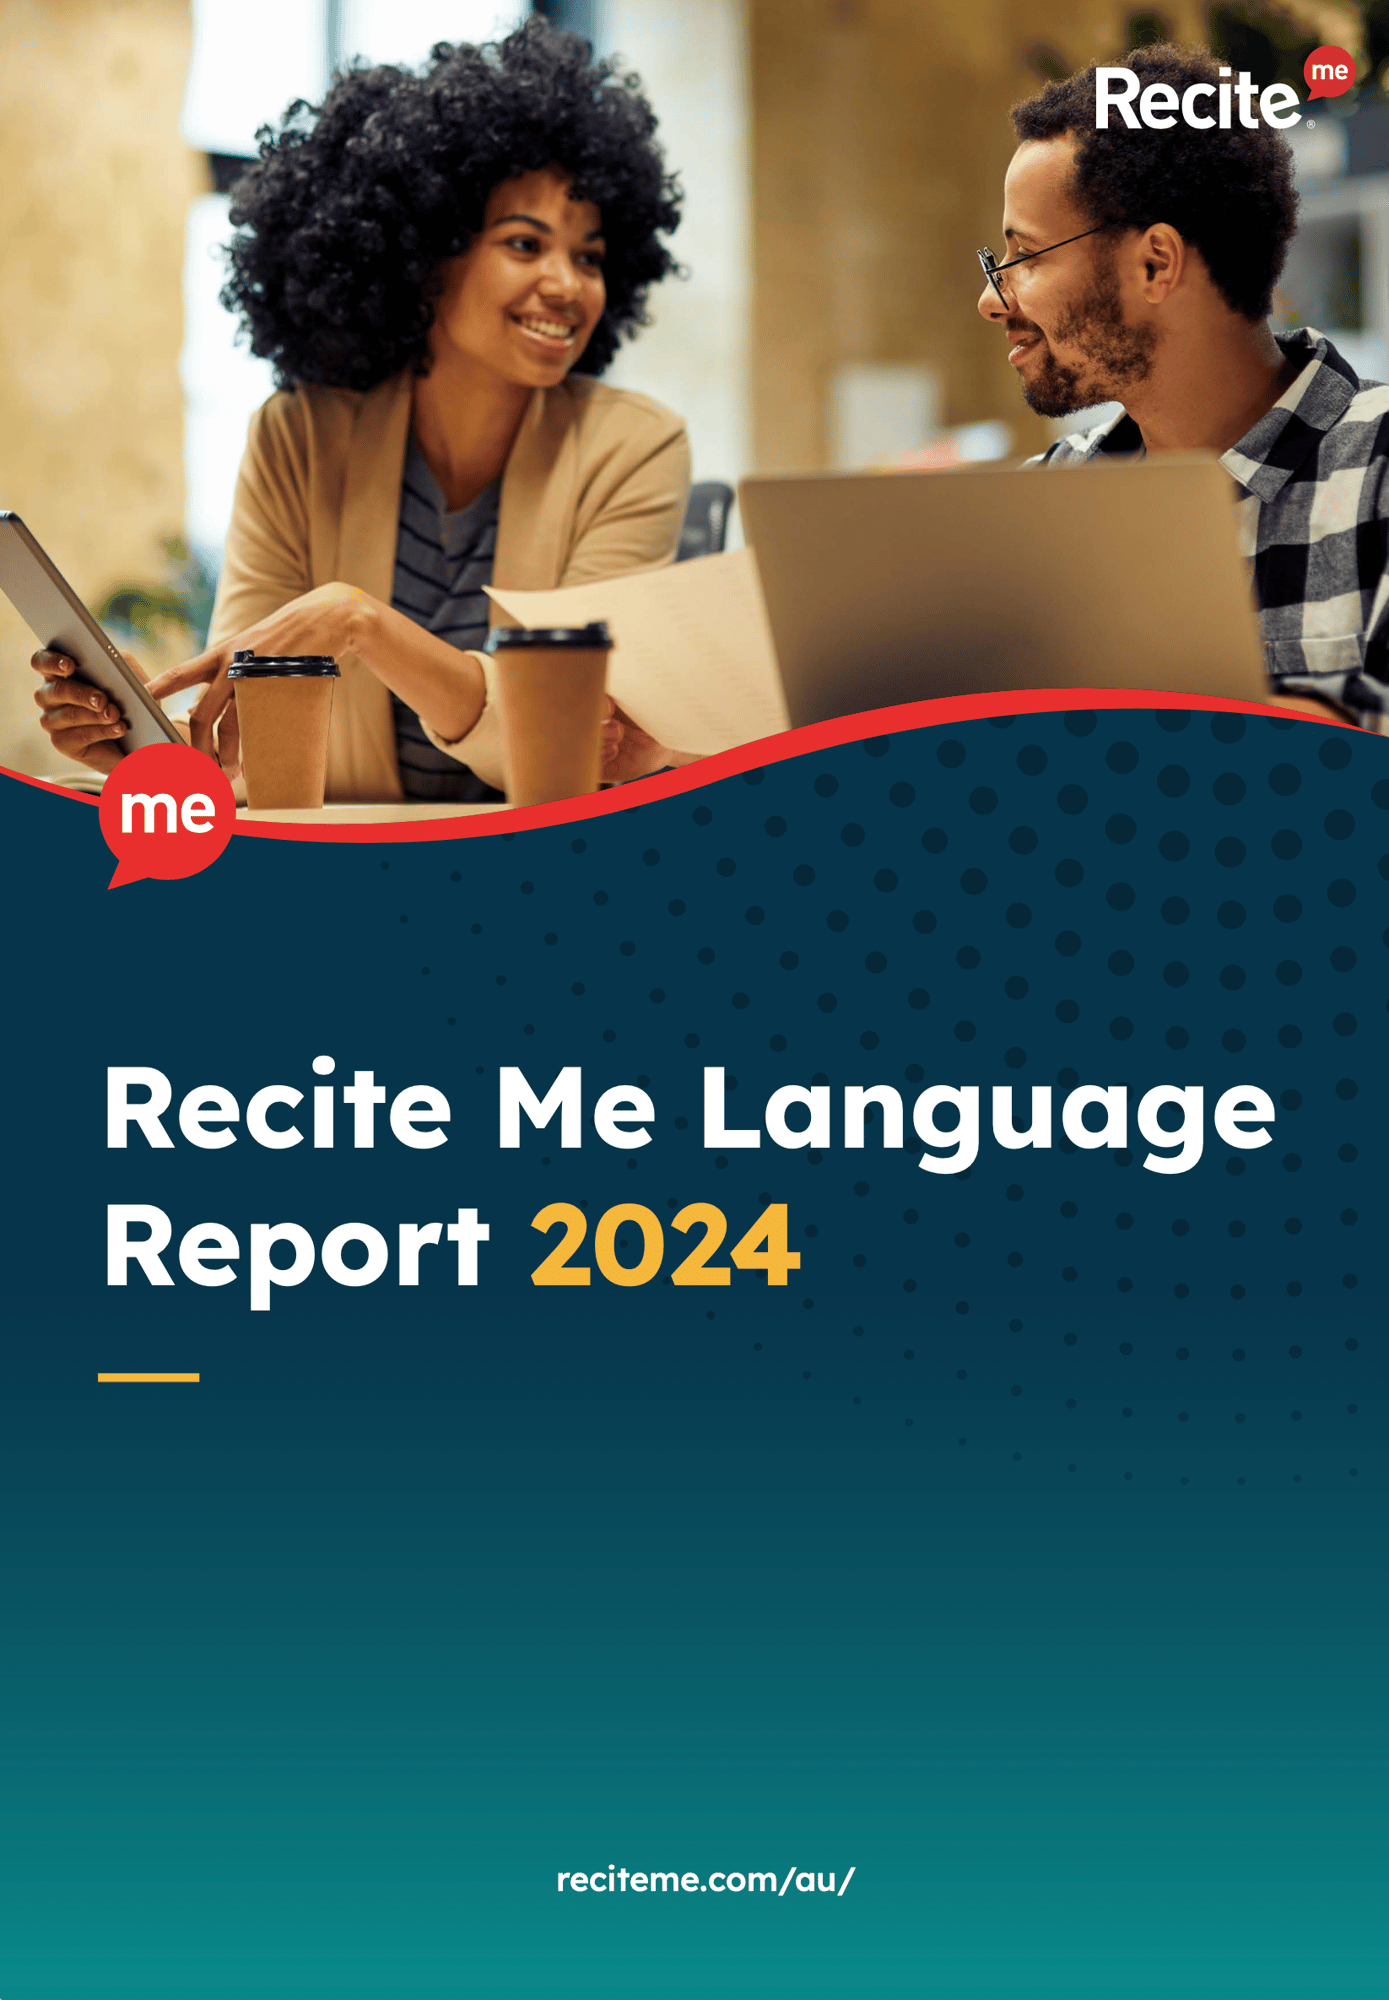 Front cover of the language report 